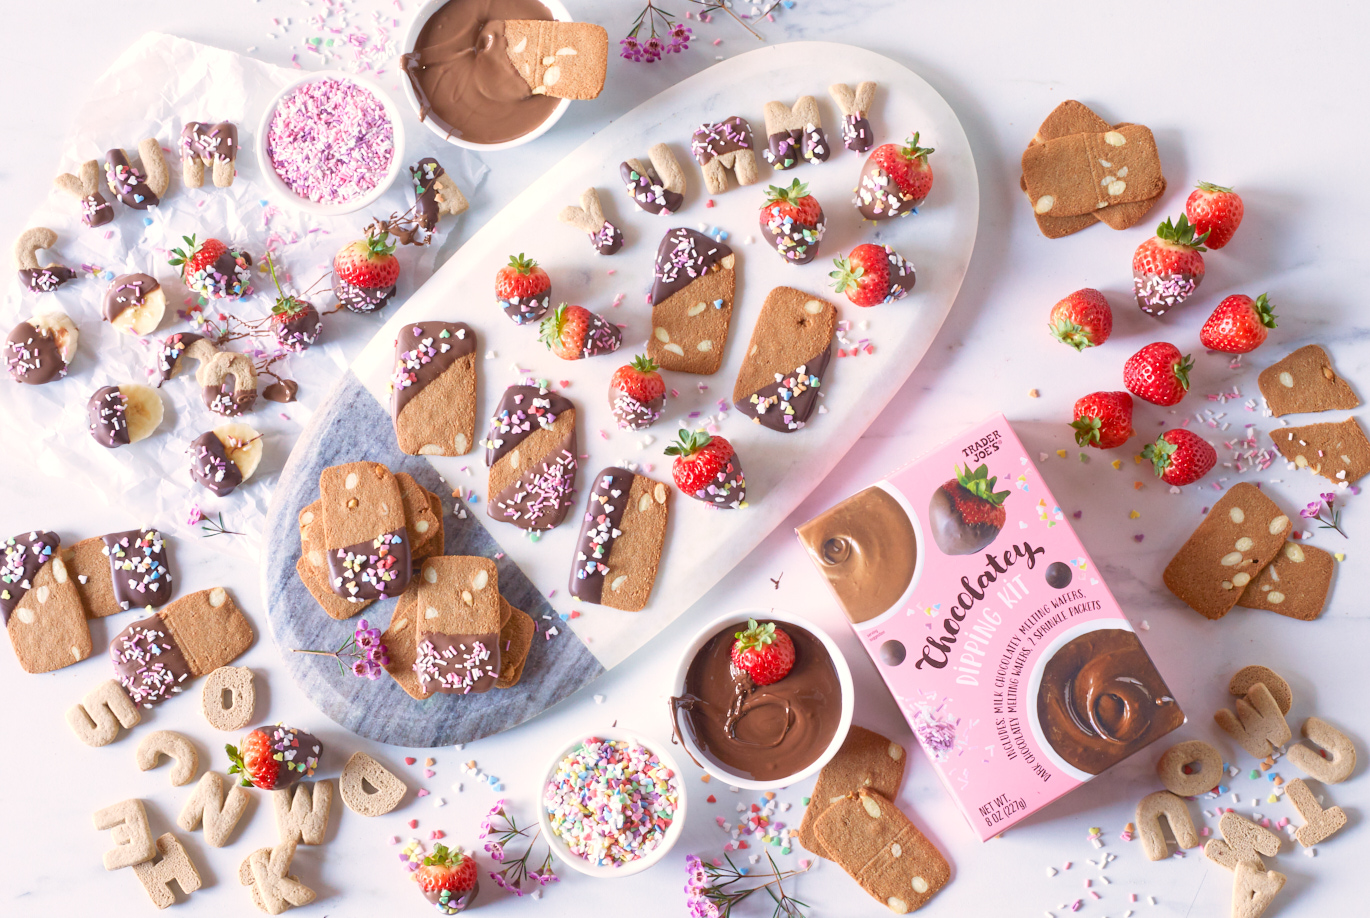 BTrader Joe's Chocolatey Dipping Kit; small dishes with milk and dark melted chocolate, small dishes with sprinkles, platter with strawberries and two kinds of cookies, dipped with chocolate and sprinkles